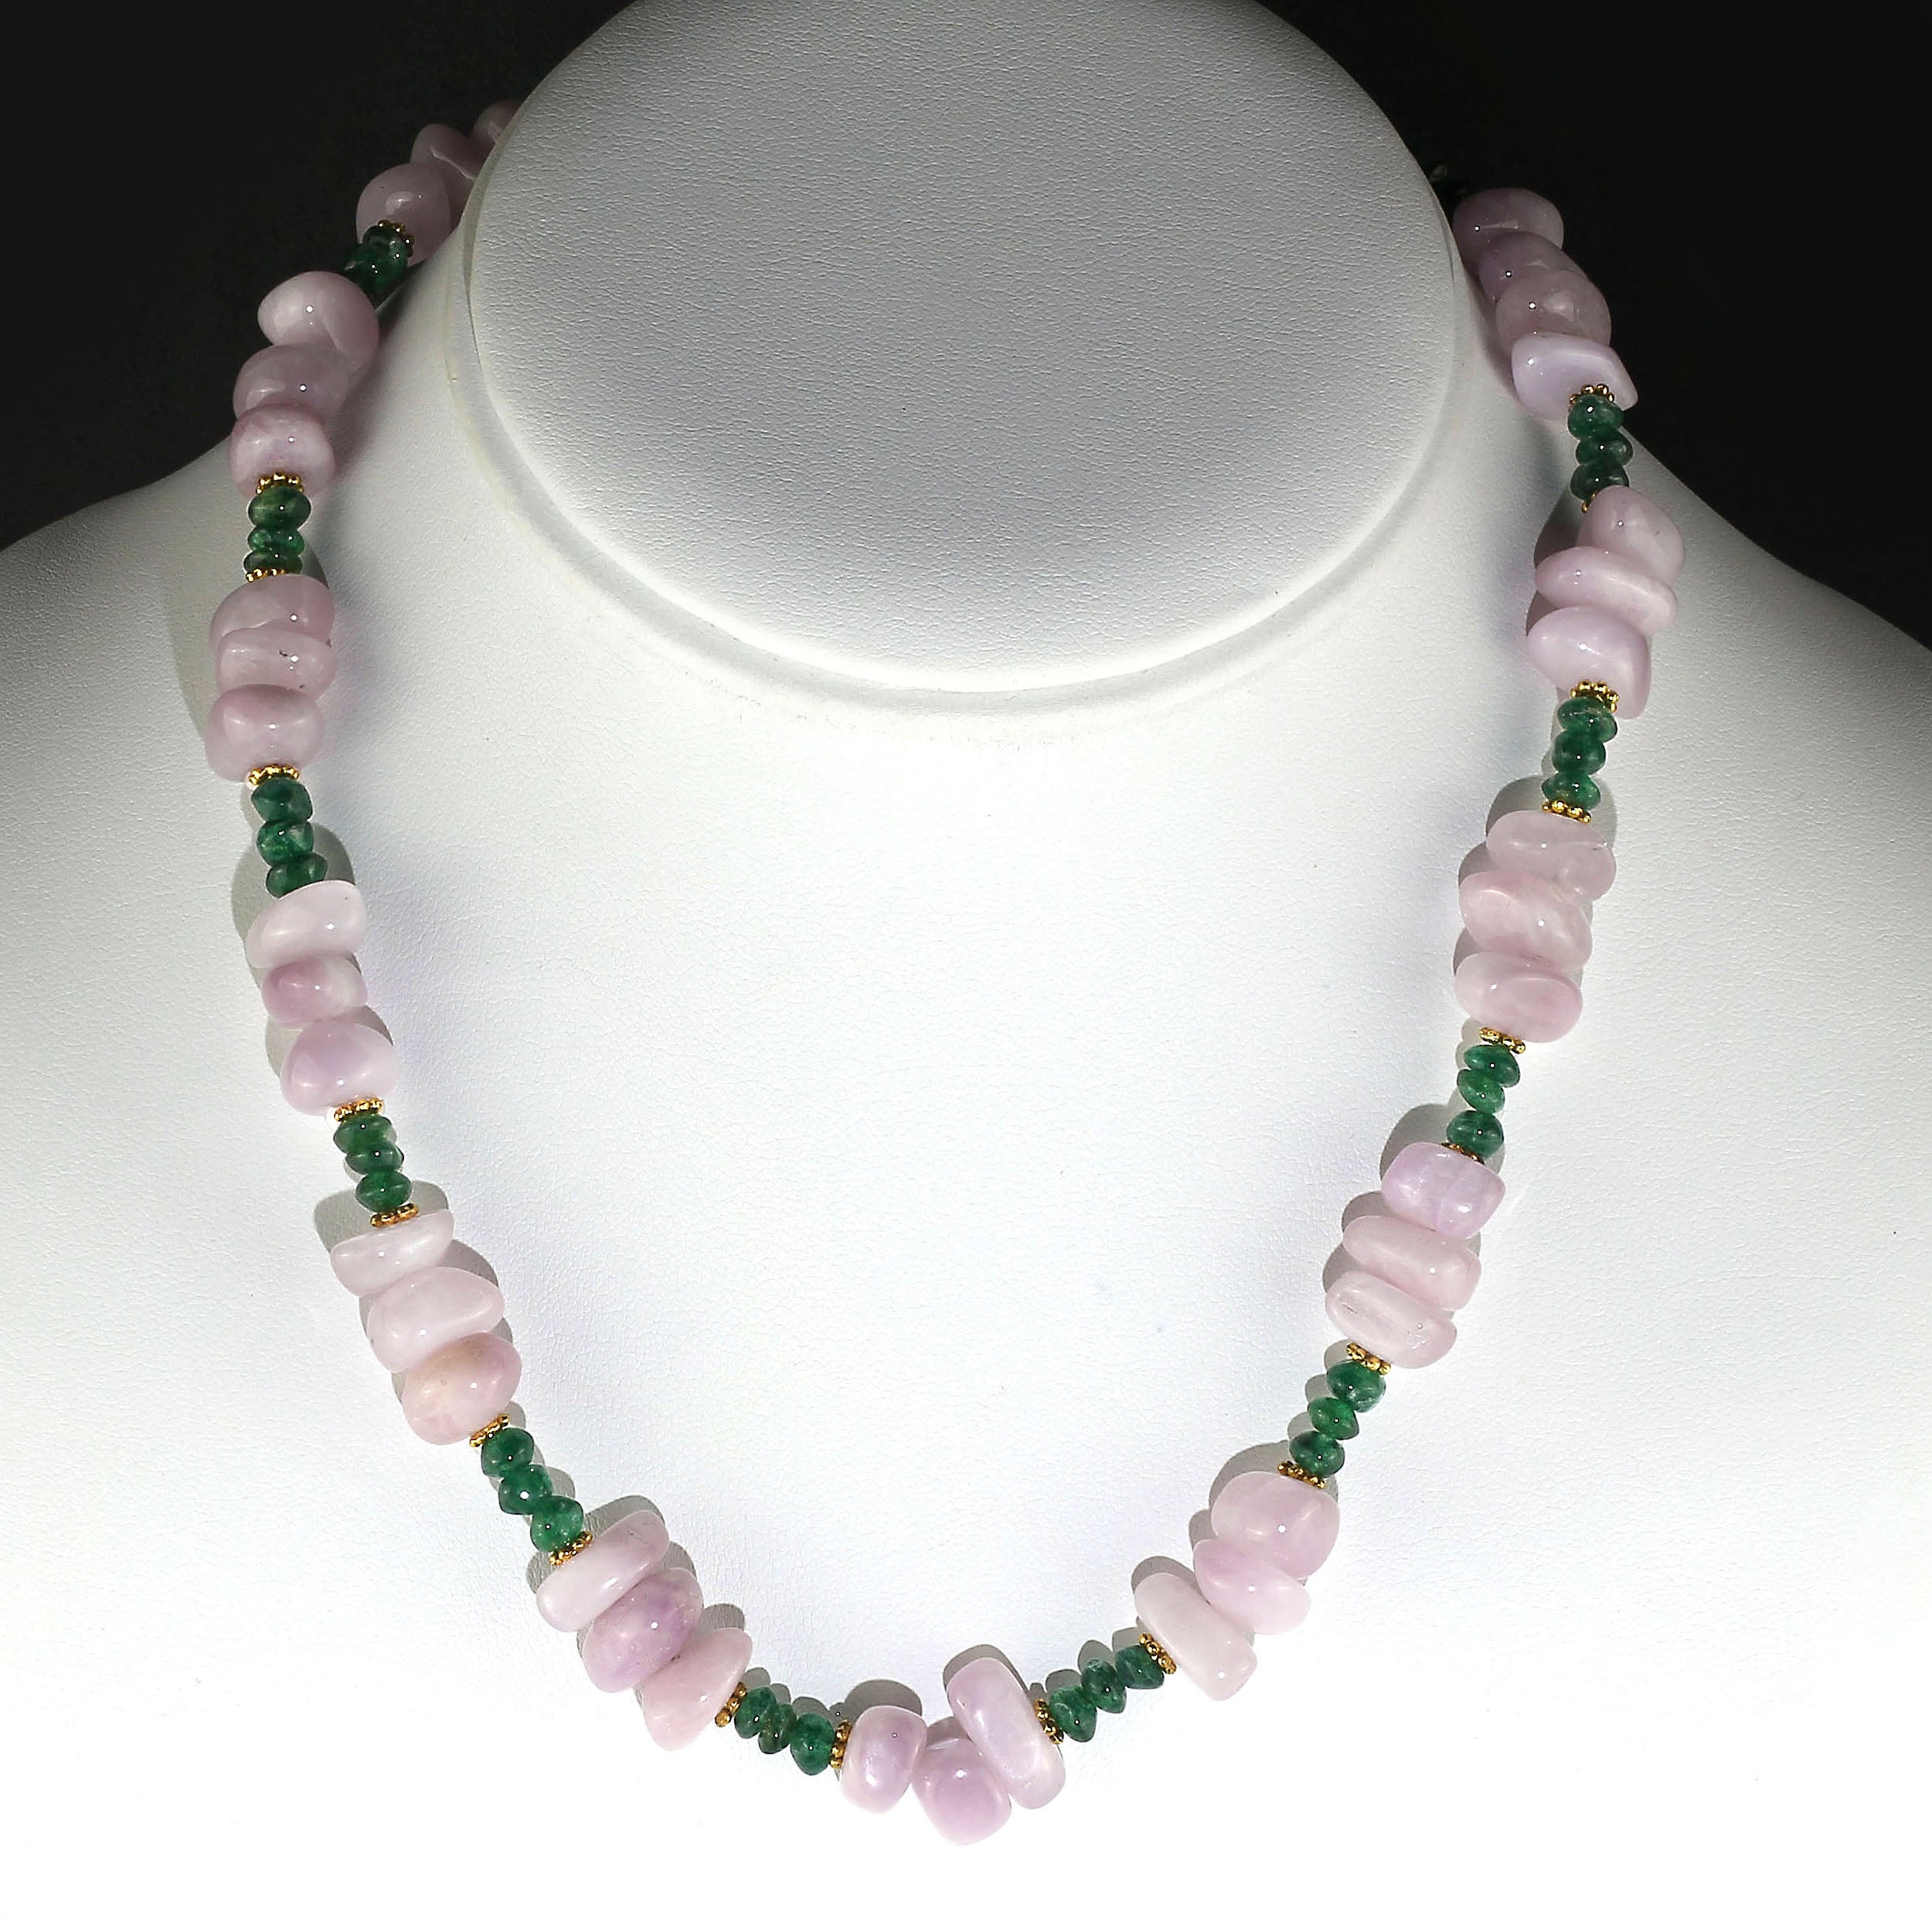 AJD Glowing Kunzite and Aventurine Necklace for Summer Fun